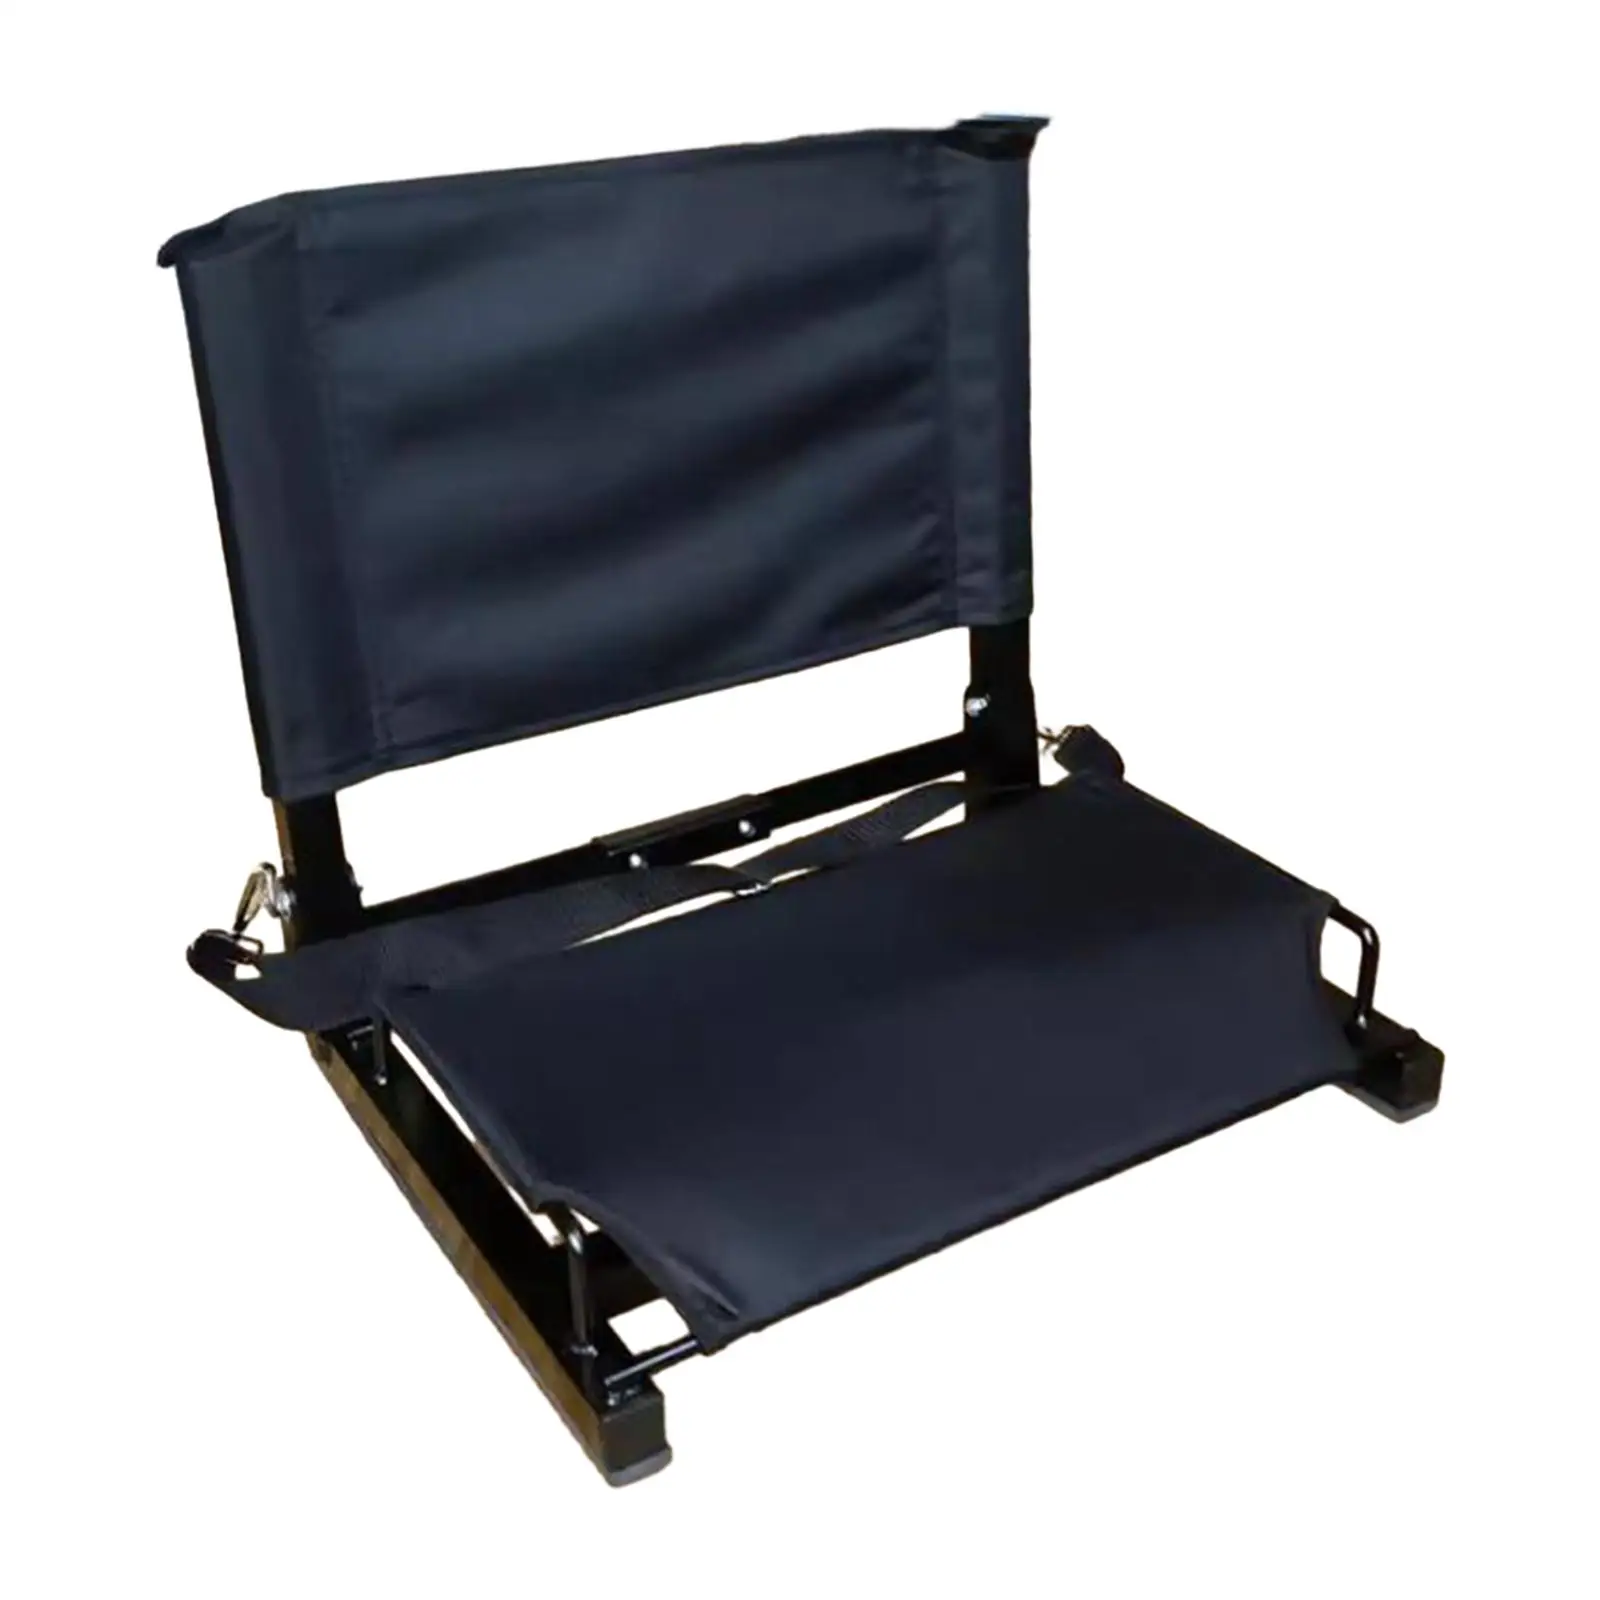 Bleacher Chair with Back Support for Sporting Events Garden Music Festival